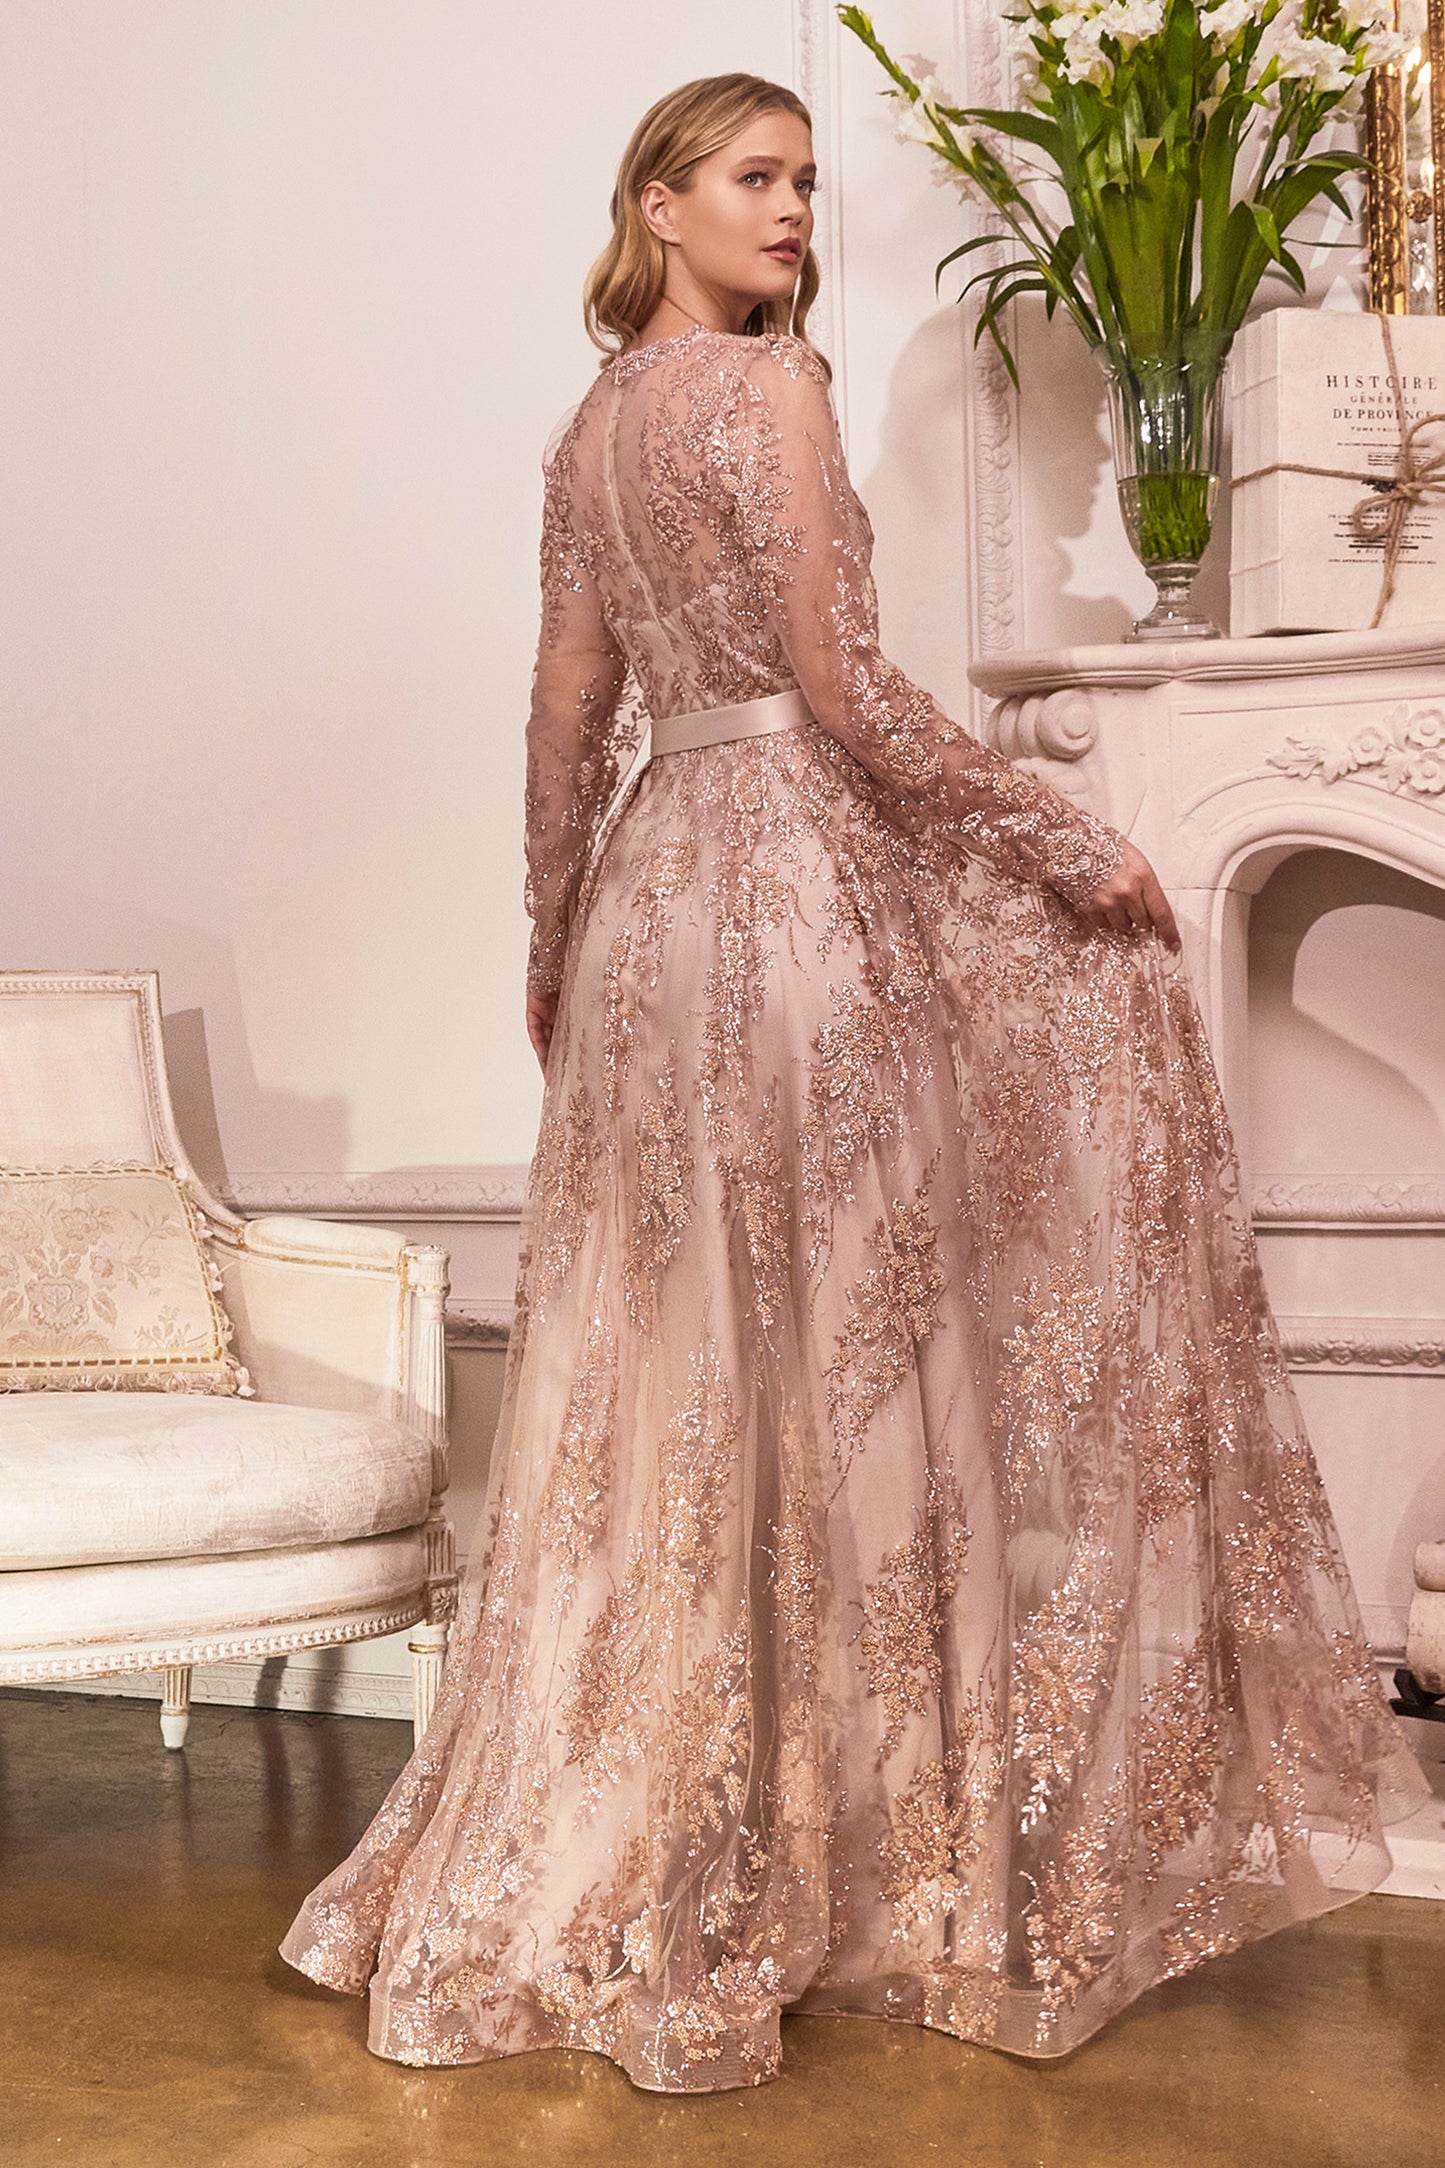 Make a grand entrance in this modest long sleeve gown. A shimmering glitter floral print adorns the fabric flowing from a lace scalloped v-neckline into an a-line layered skirt. The center back is closed with a zipper allowing for more coverage and wrist